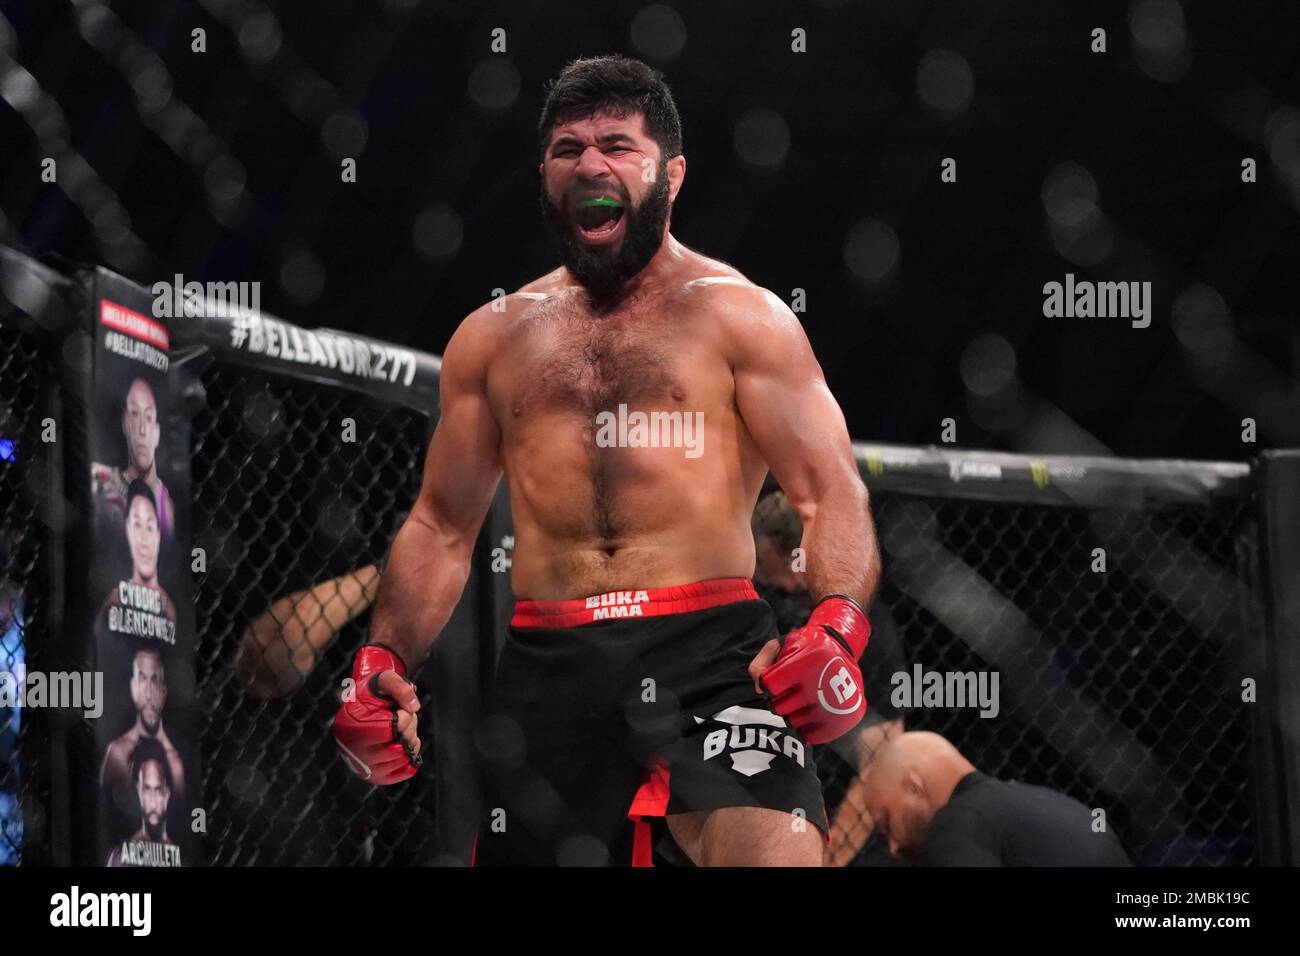 Dovletdzhan Yagshimuradov celebrates after defeating Rafael Carvalho during a light heavyweight bout at the Bellator 277 mixed martial arts event in San Jose, Calif., Friday, April 15, 2022